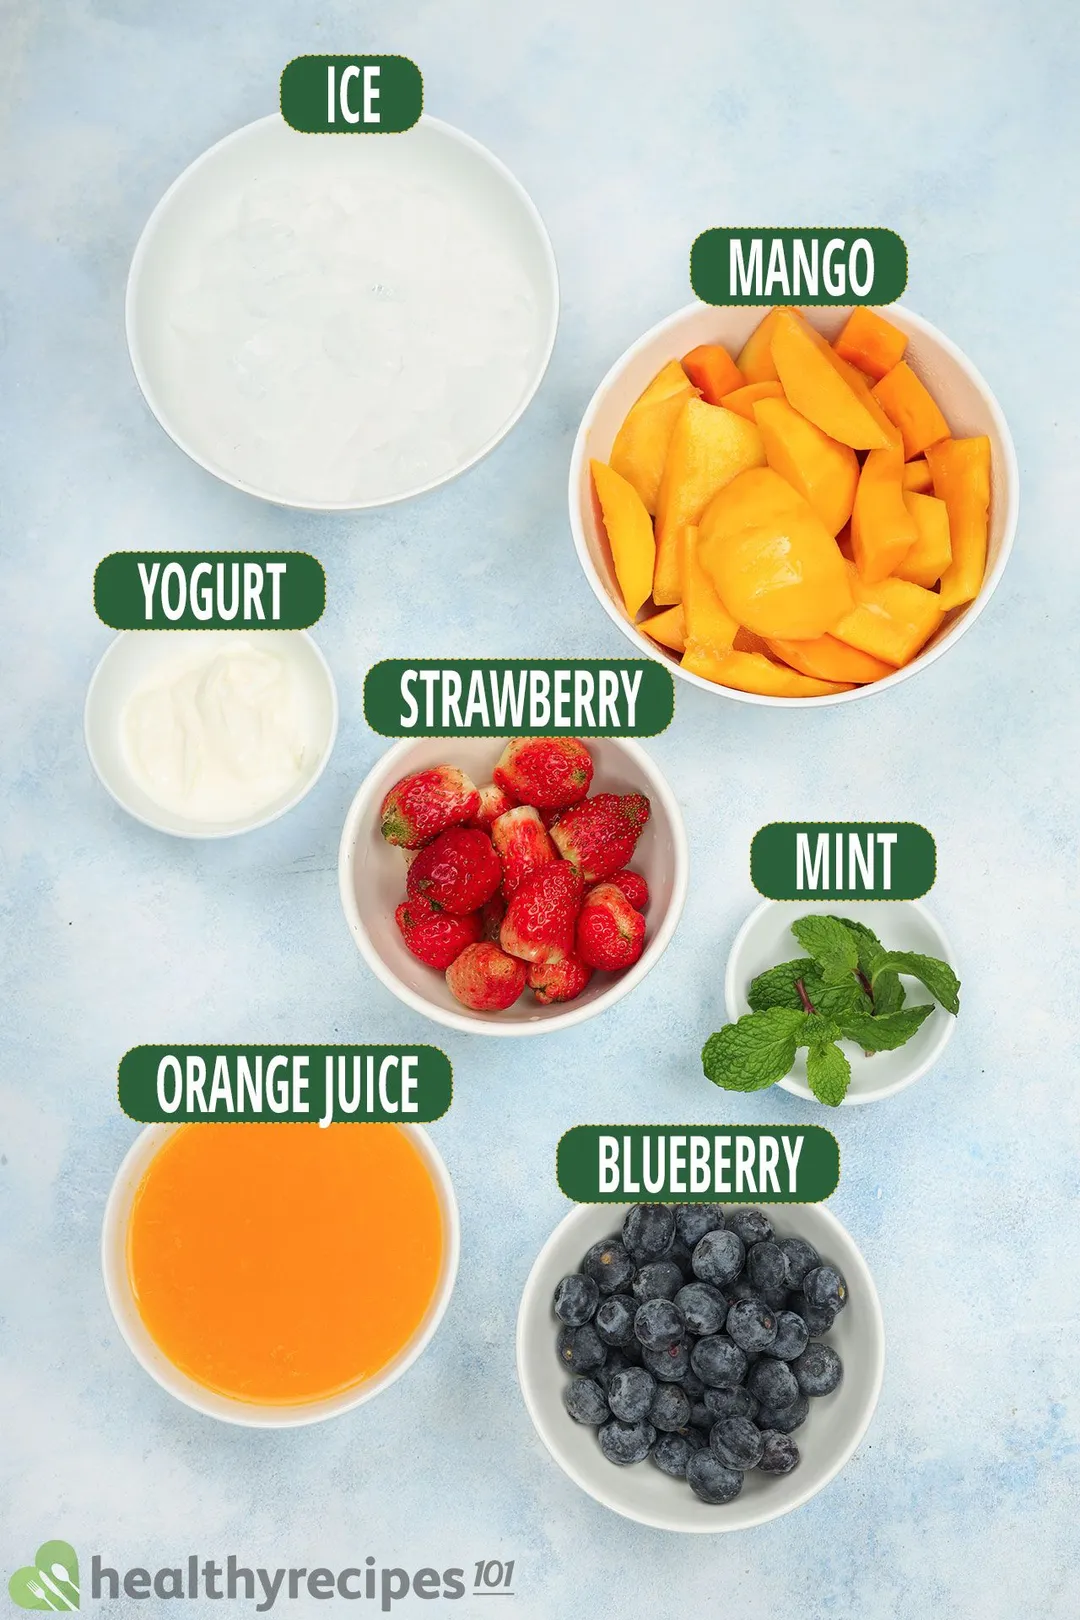 Ingredients for Mango Berry Smoothie, including bowls of mango slices, blueberries, strawberries, mint leaves, orange juice, and more.